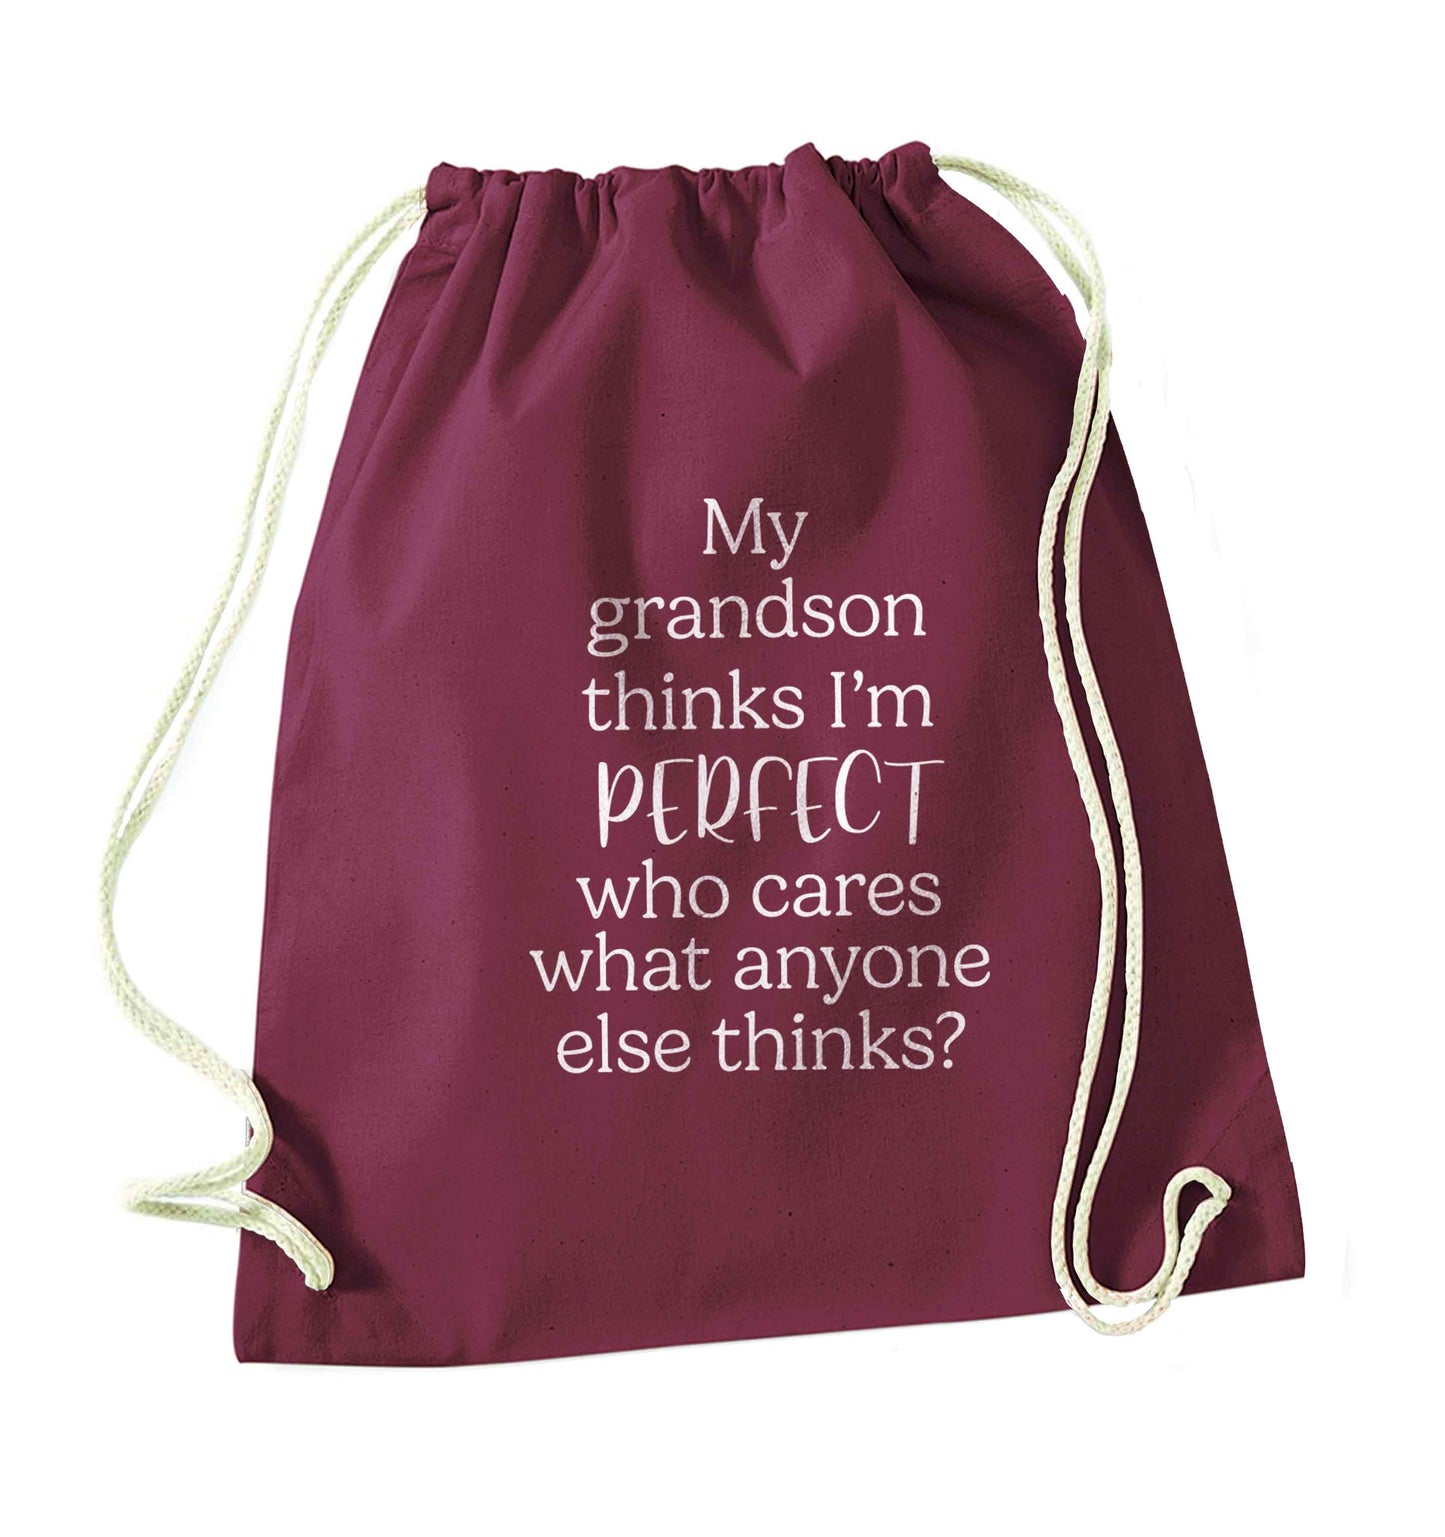 My Grandson thinks I'm perfect who cares what anyone else thinks? maroon drawstring bag